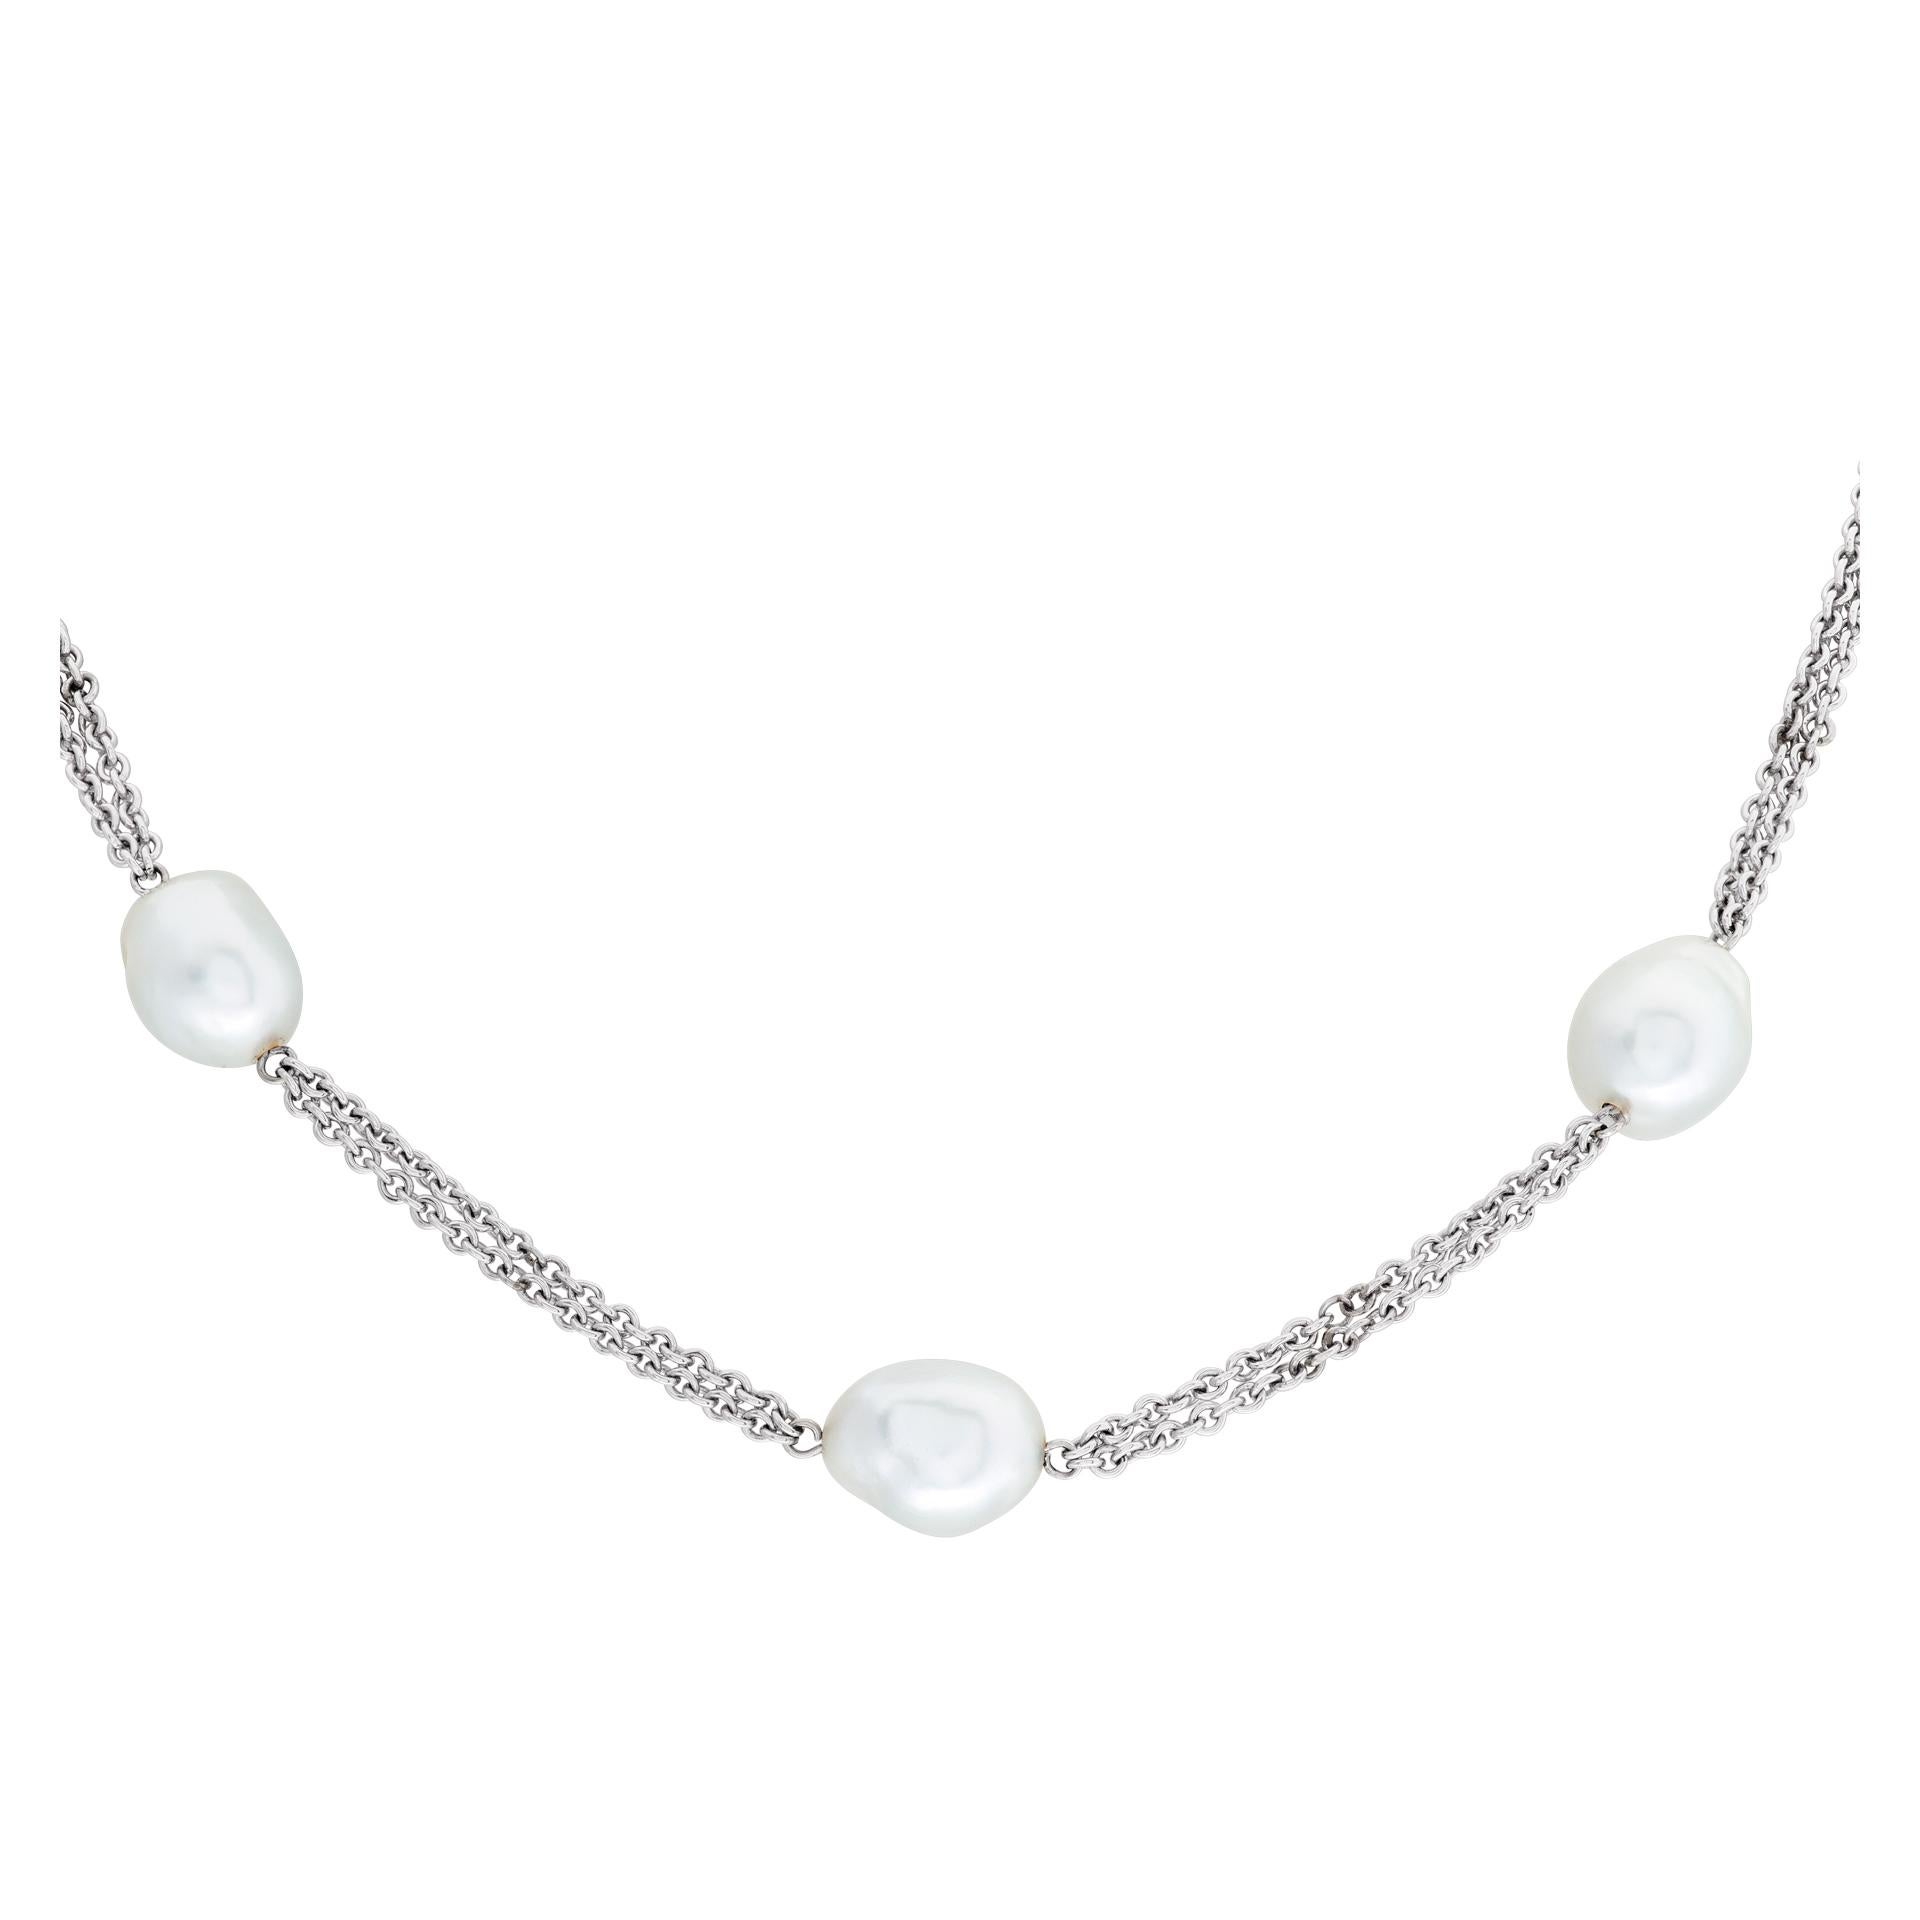 Luxurious 18k white gold necklace, with rare South Sea pearls measuring 10mm x 13mm, and with soft silver tone, on a 18k white gold chain with a lobster clasp. 15